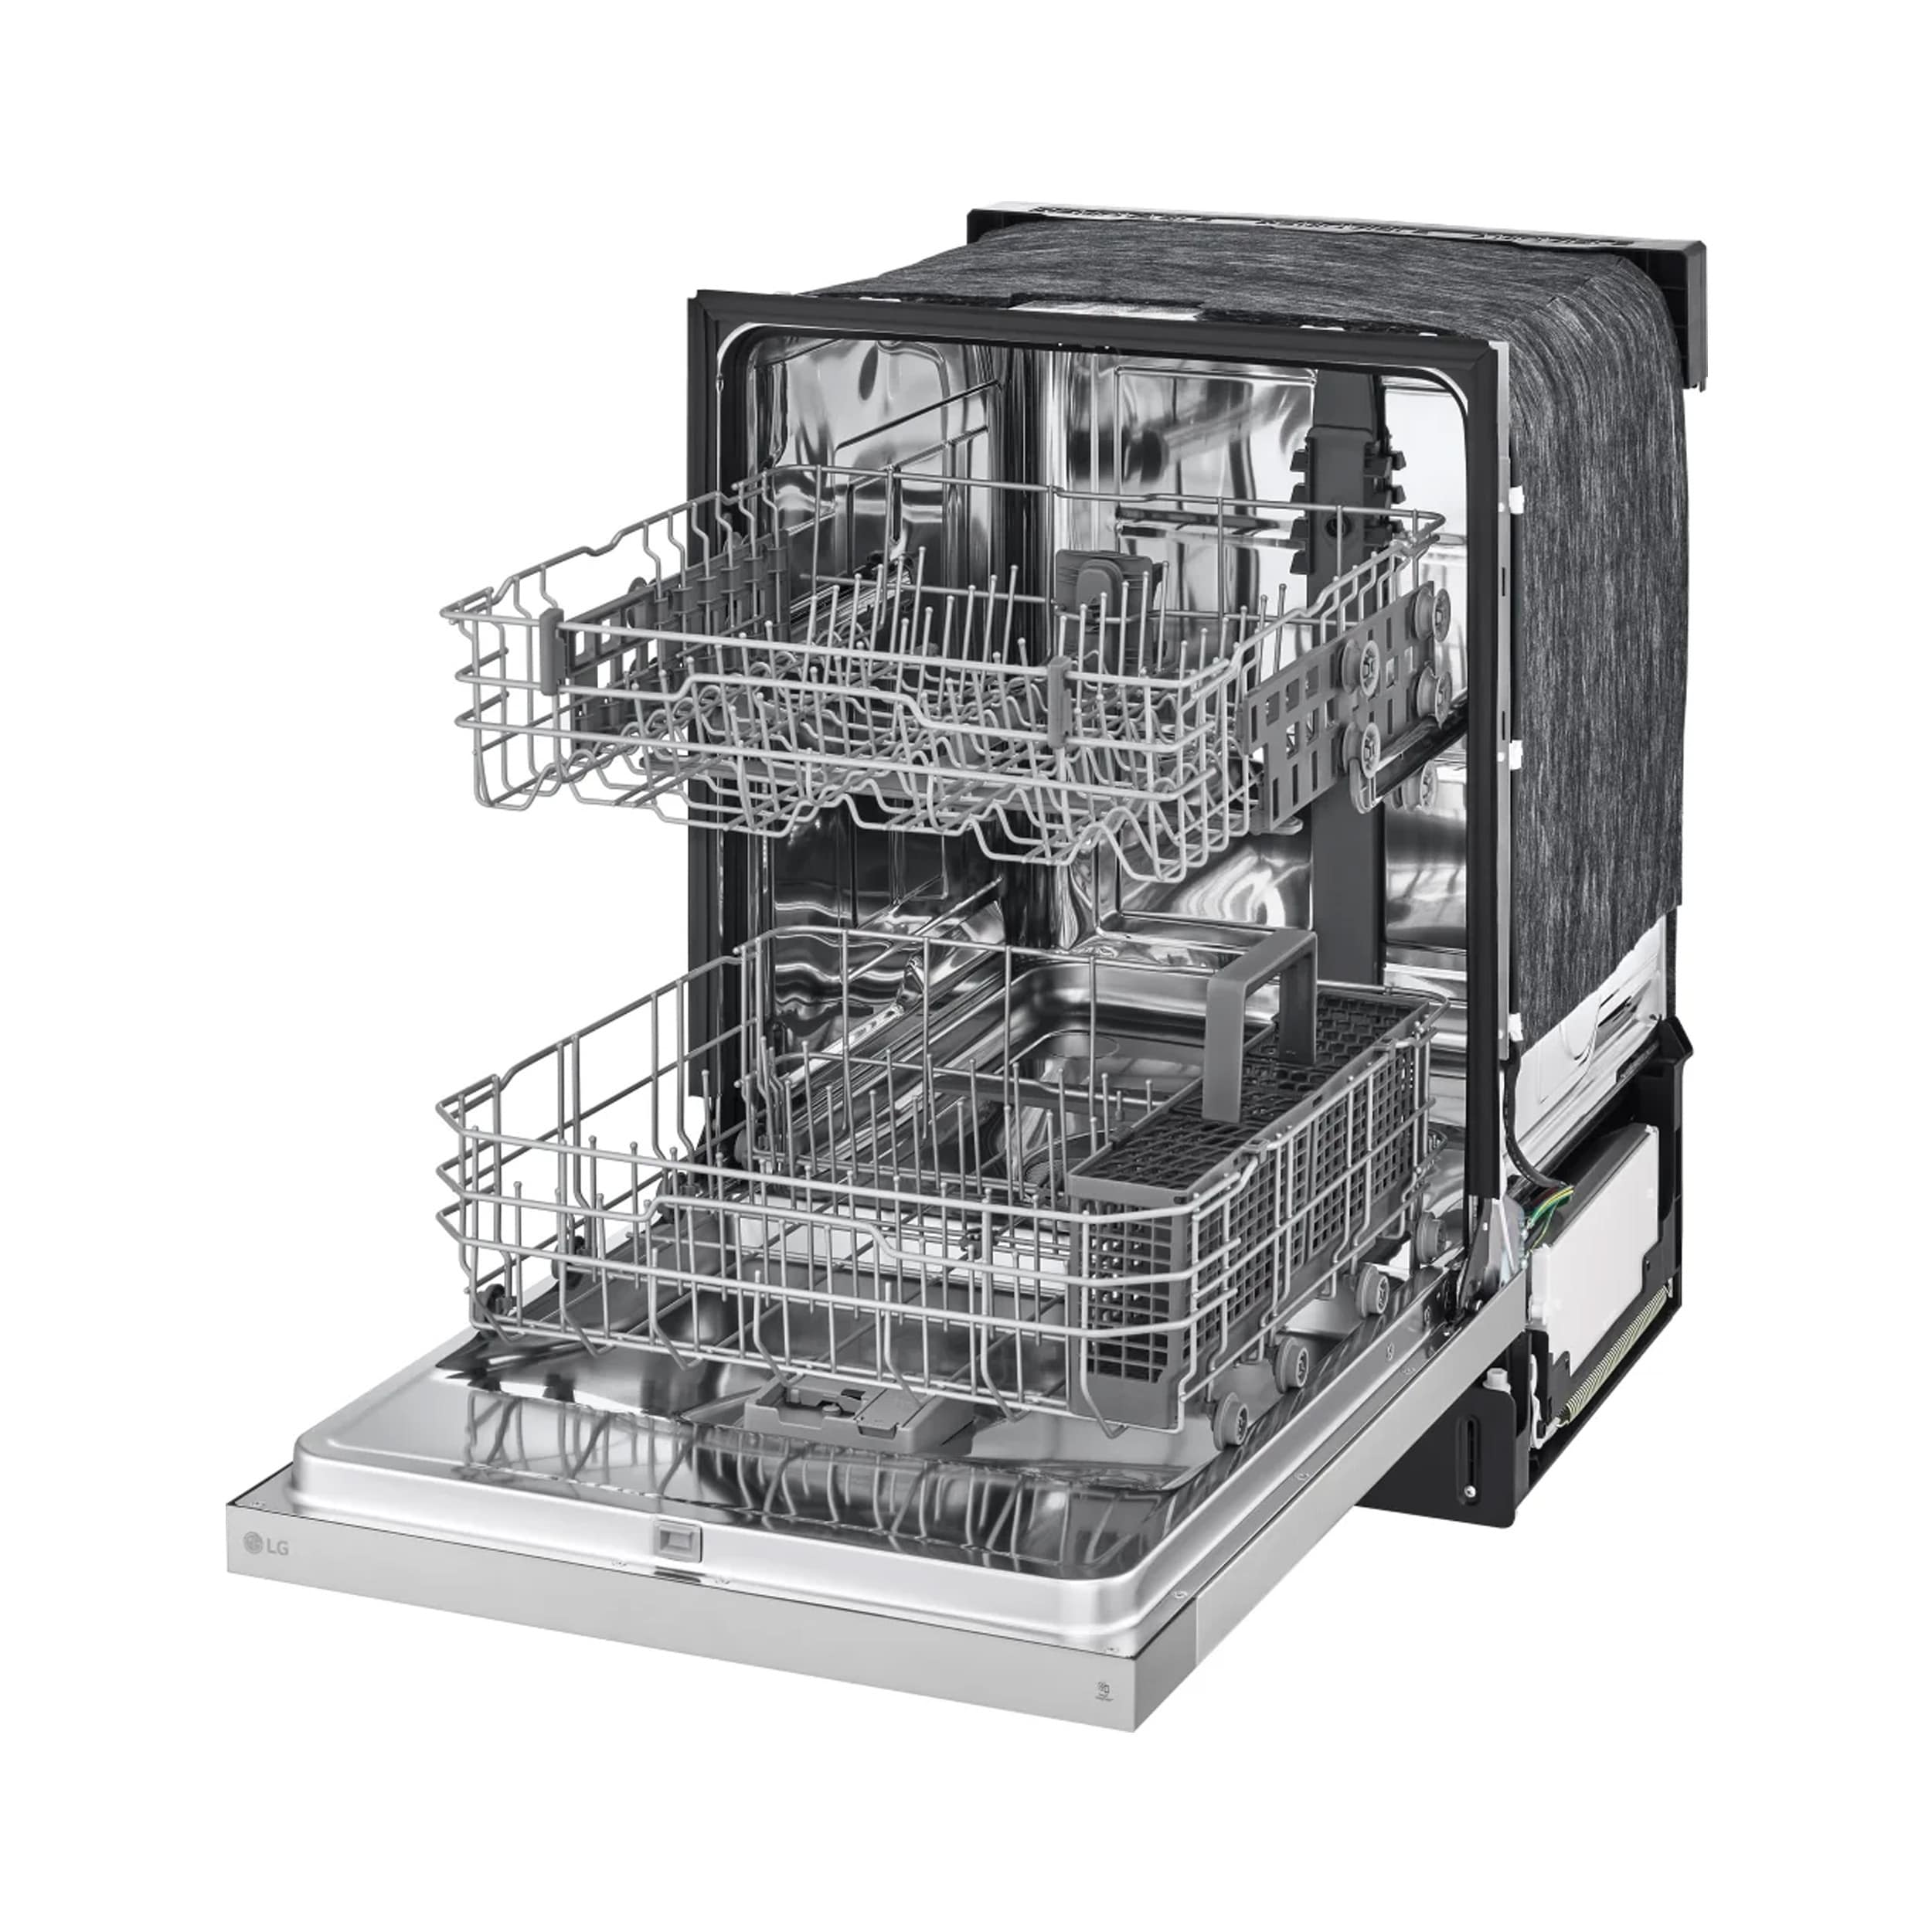 LG 24 Inch Full Console Dishwasher with 15 Place Settings, Front Controls